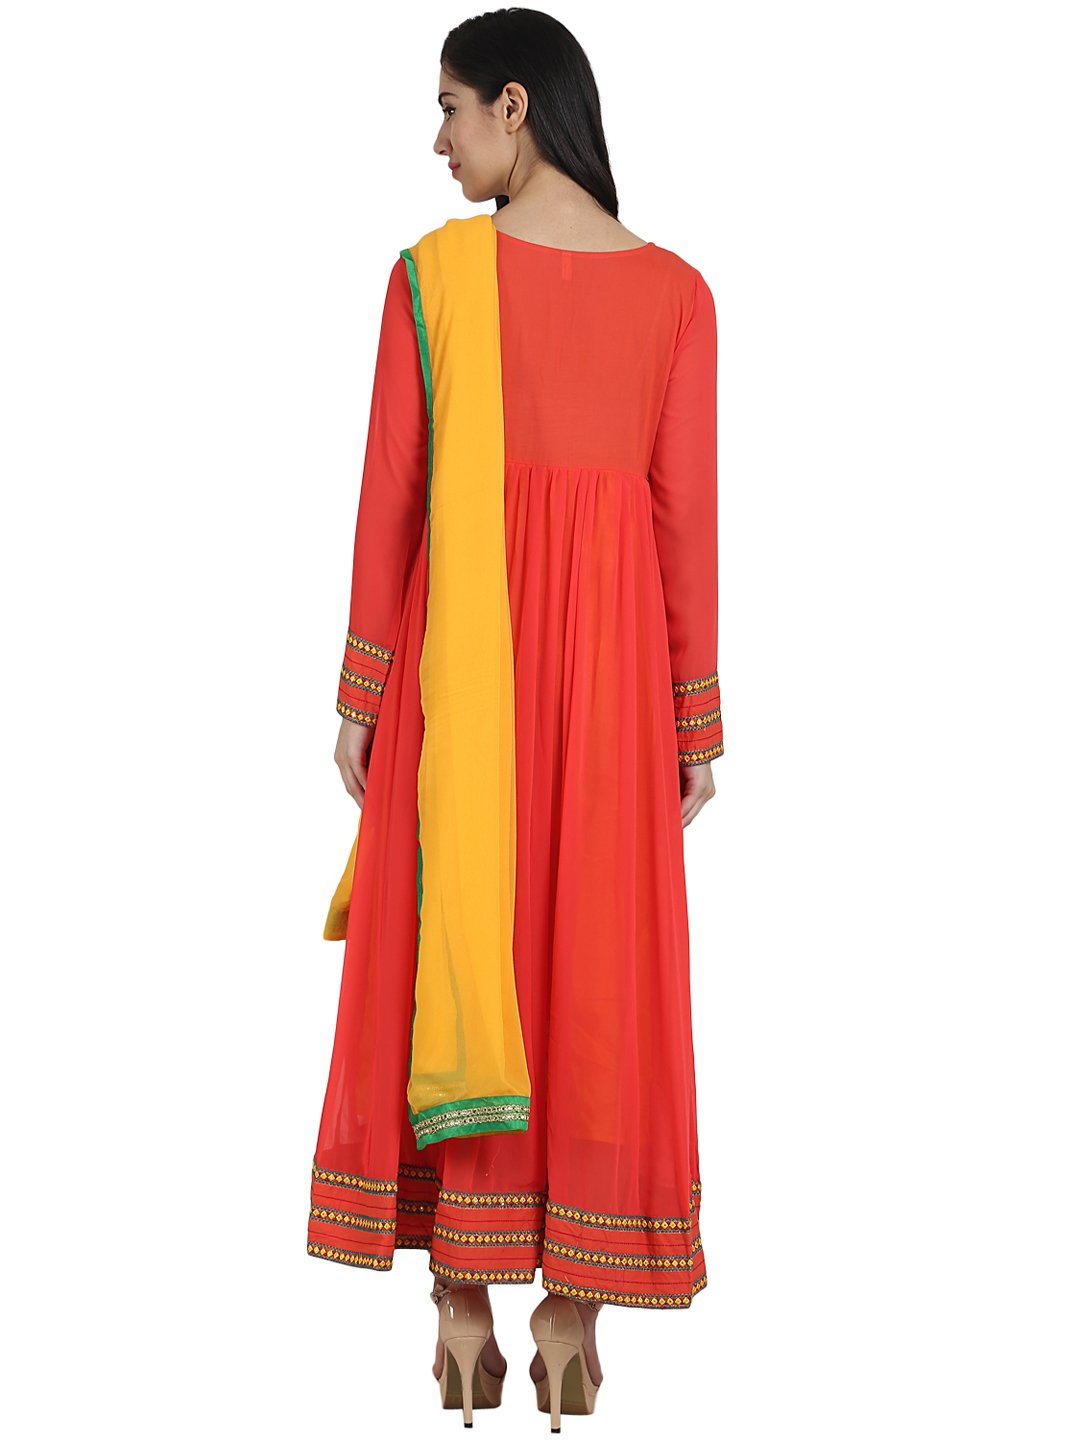 Women's Orange Color 3/4Th Sleeve Georgette Anarkali Kurta With Embriodery Work And Yellow Dupatta - Nayo Clothing